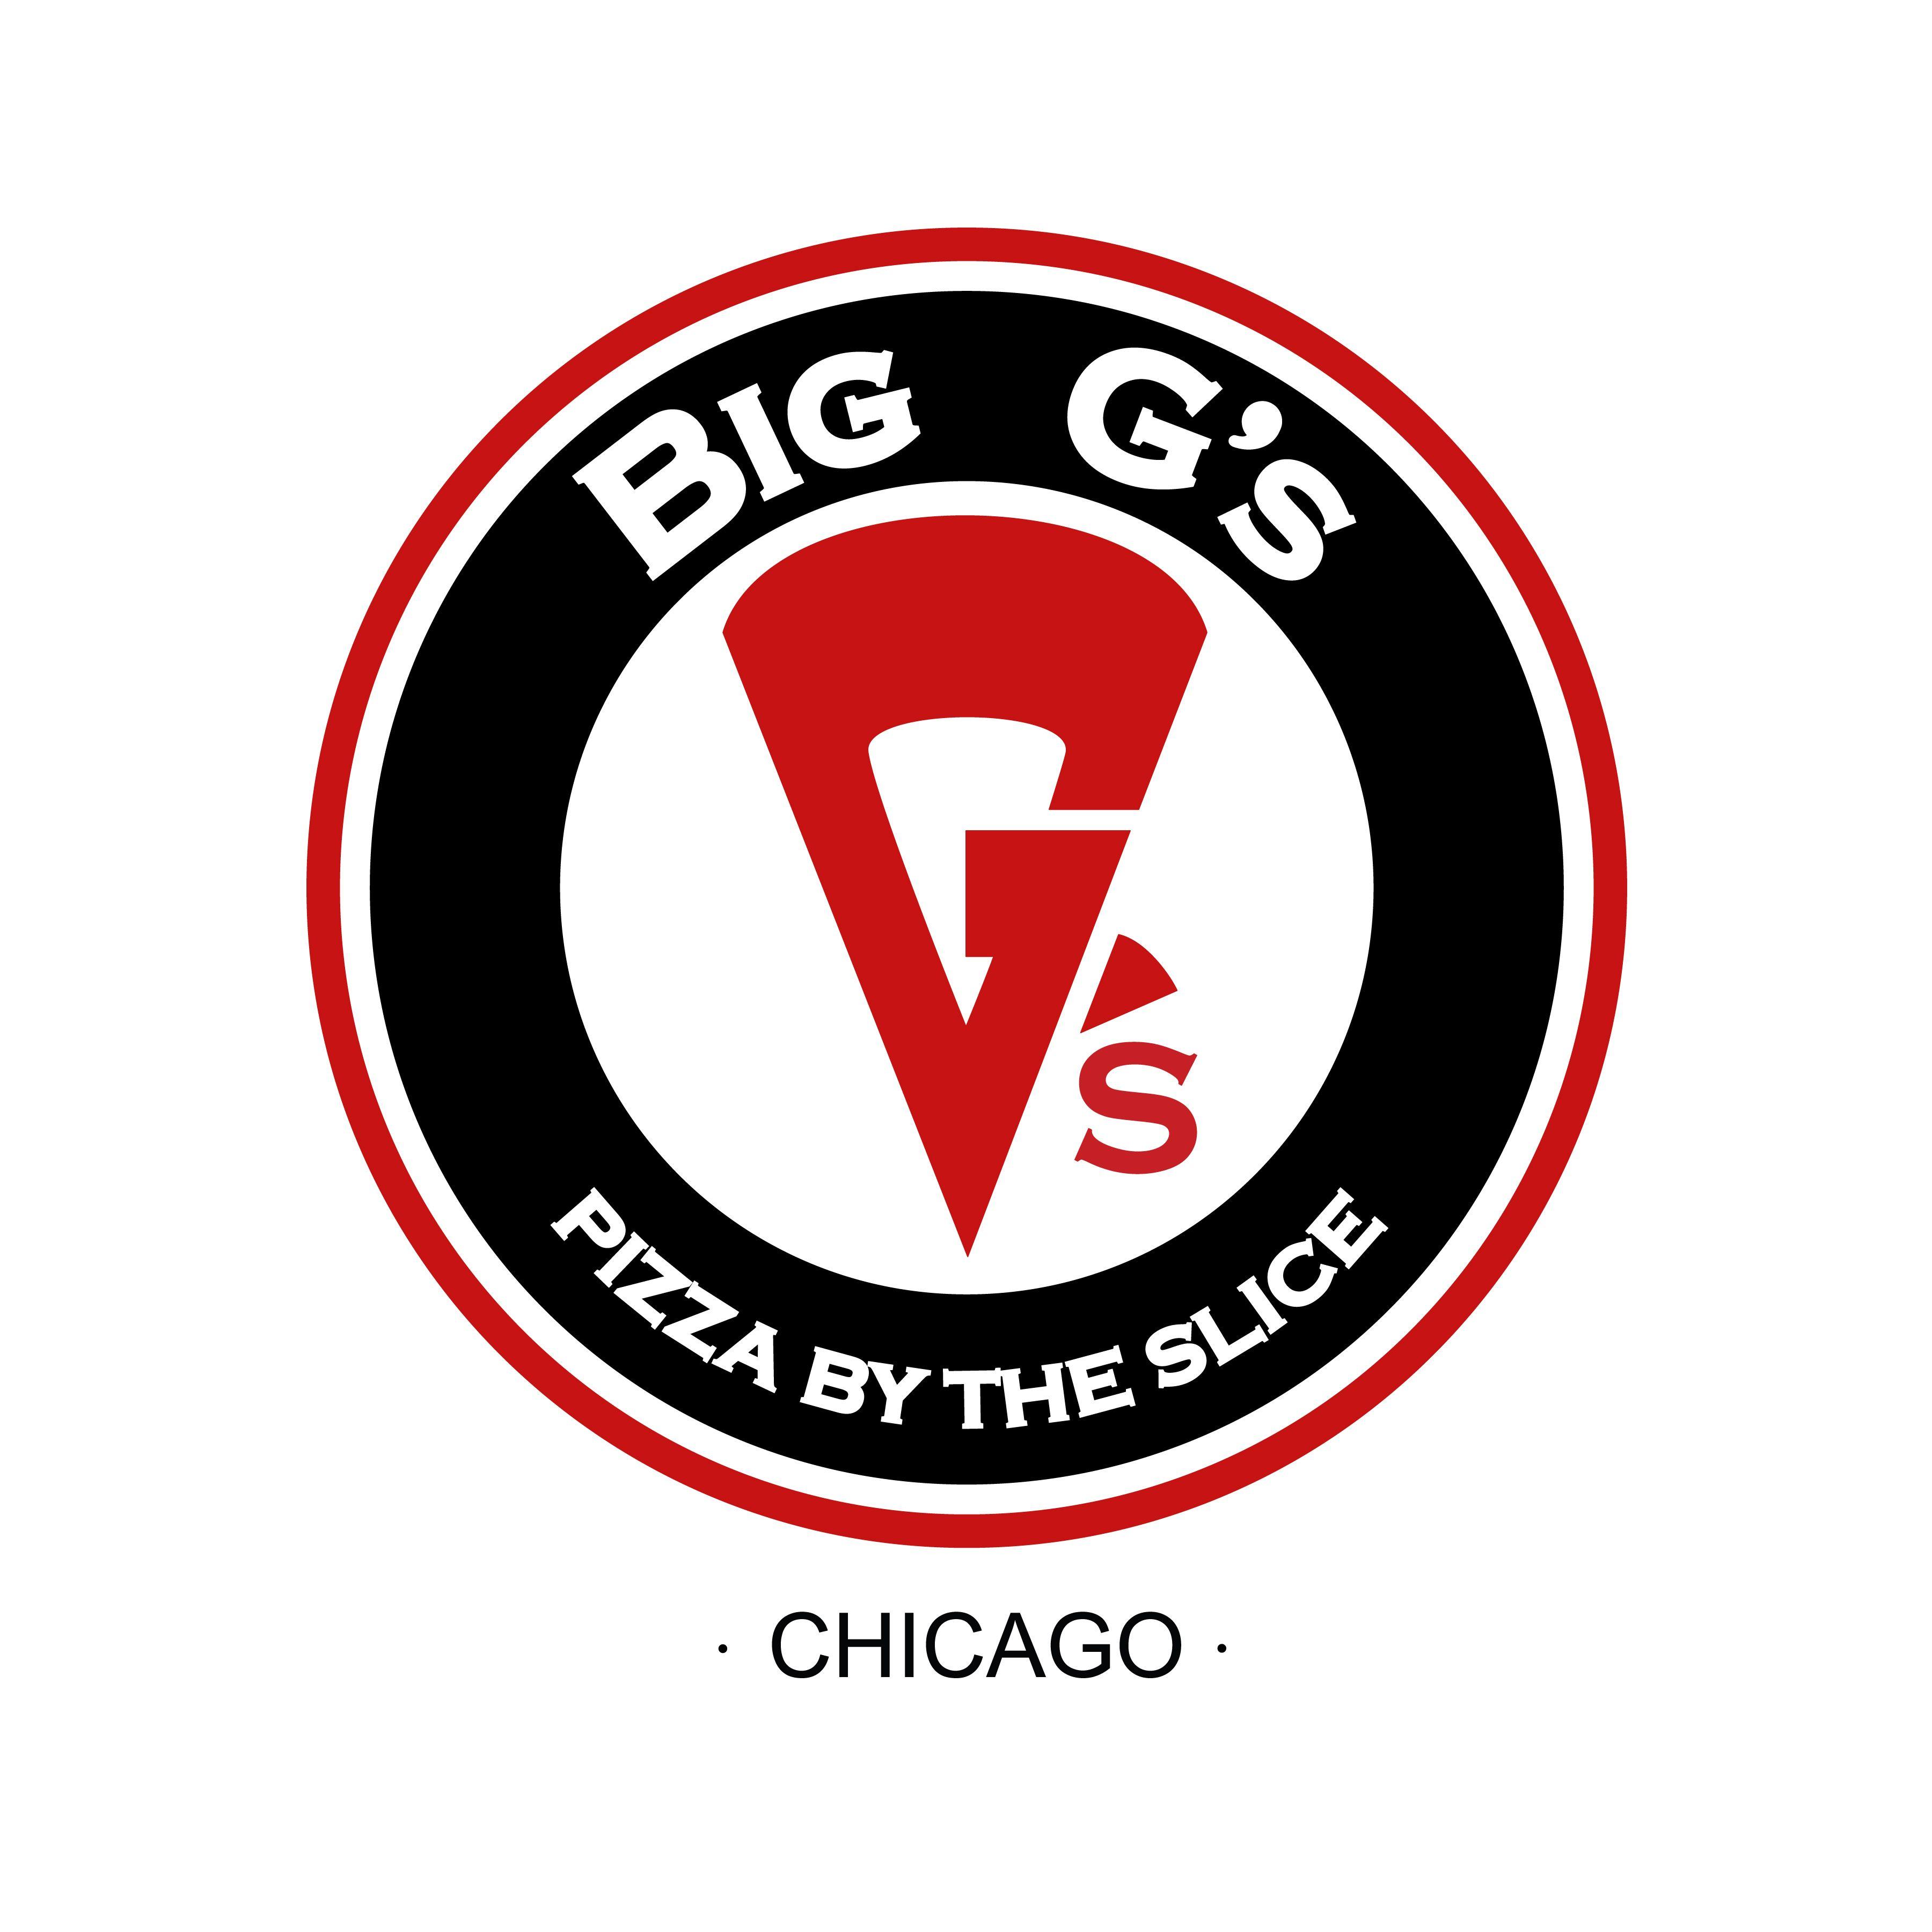 Chi-Town Logo - Big G's Pizza Logo - Chi Town | 19 West Designs | Pizza logo, Moving ...